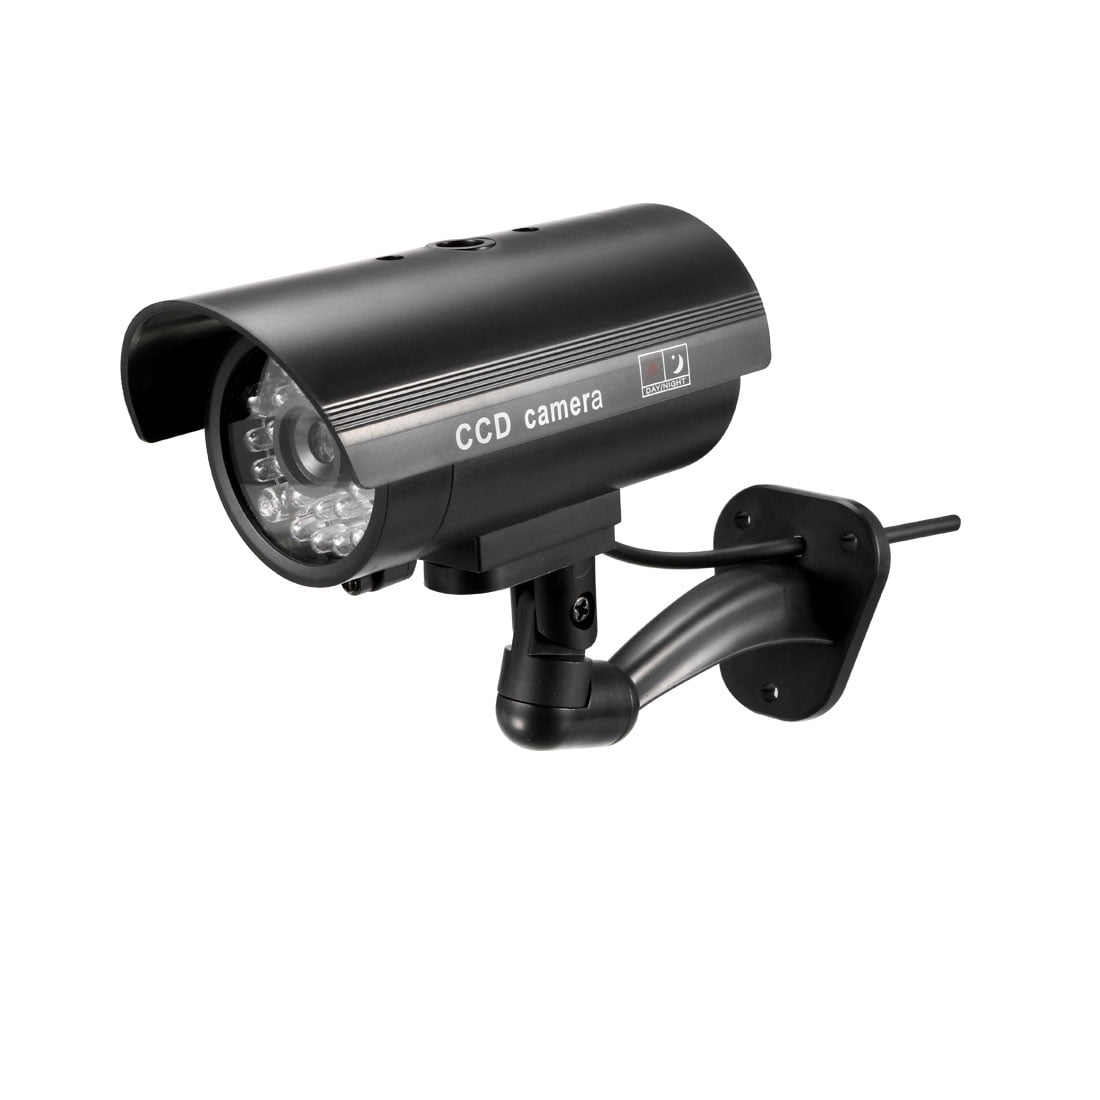 applause tank Hobart Fake Security Camera Dummy CCTV Cameras with LED Light Warning Security  Sticker for Outdoor Indoor Black - Walmart.com